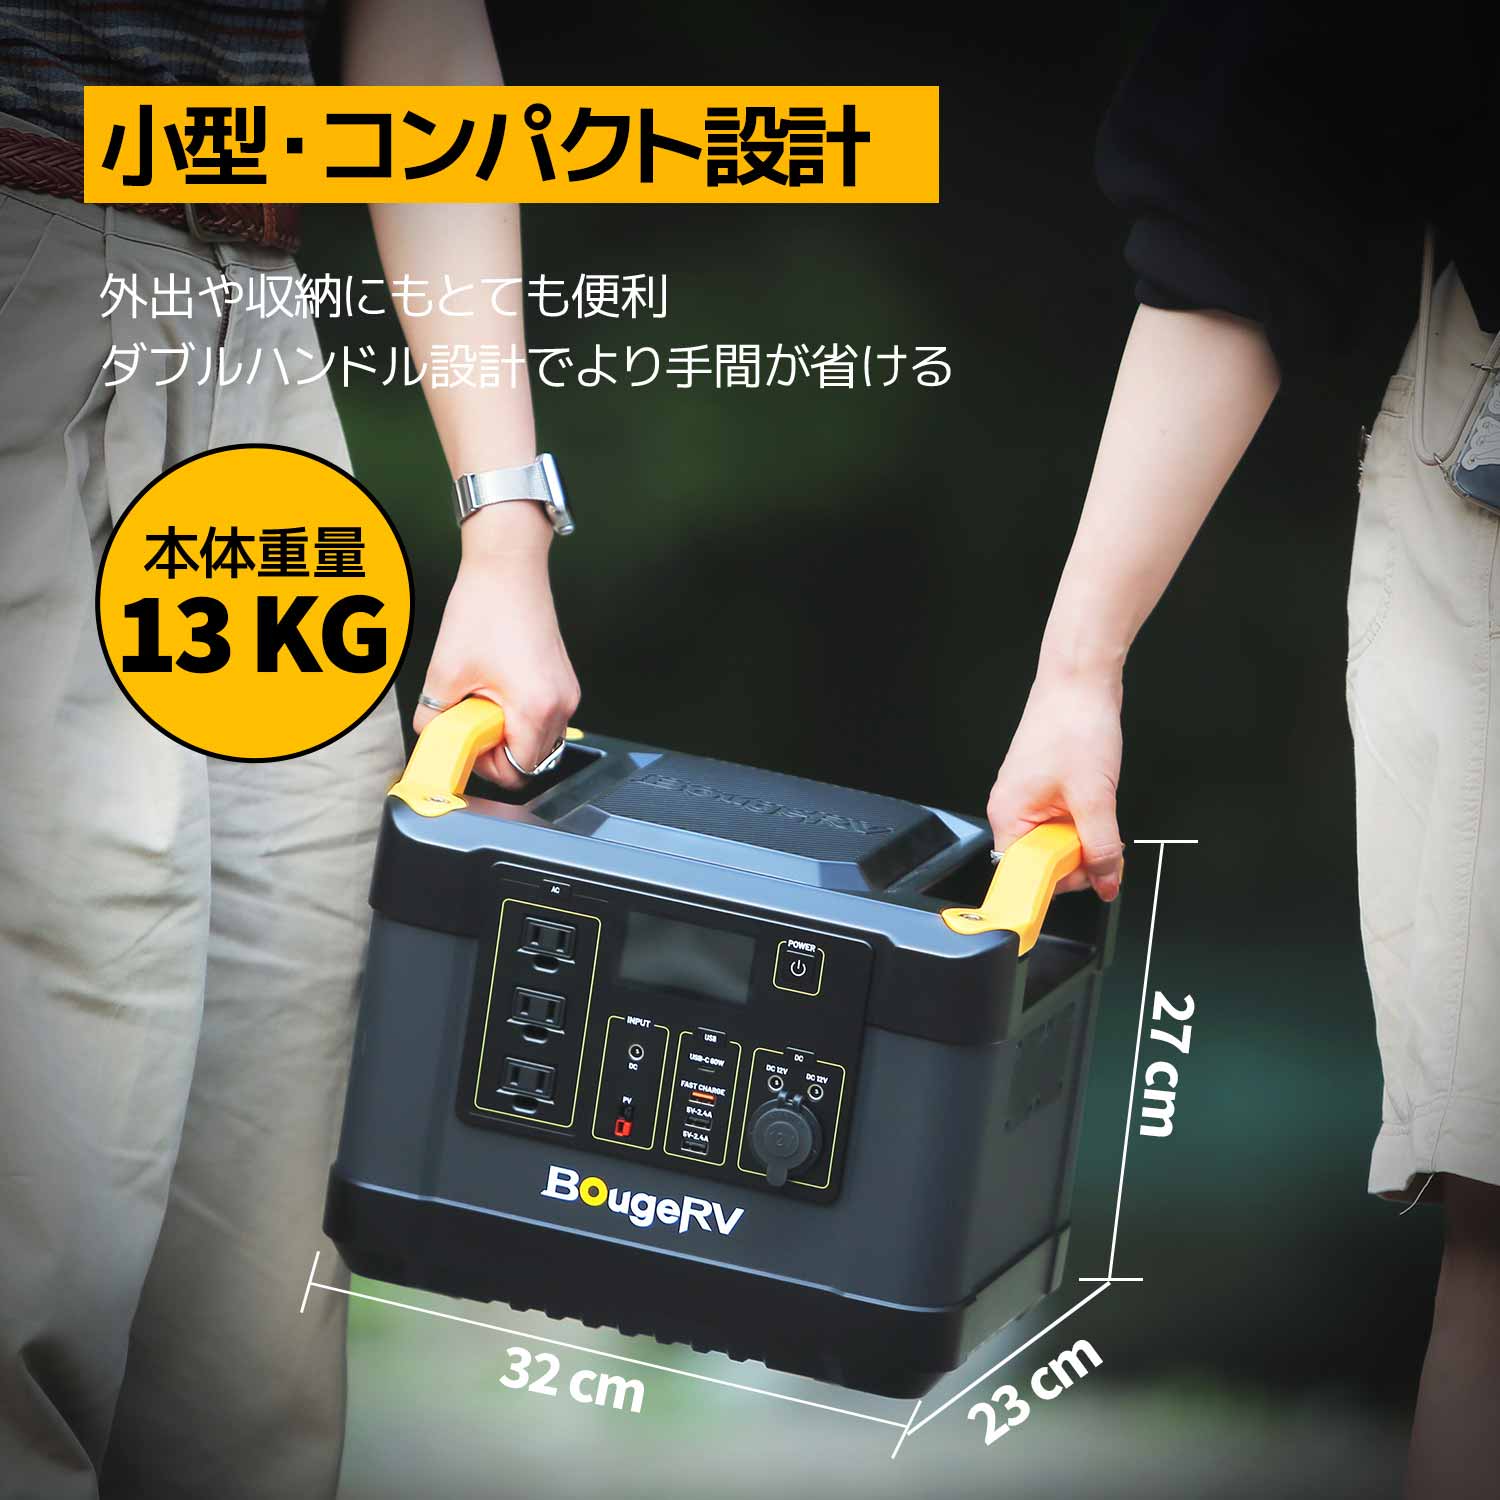 BougeRV ポータブル電源 1100Wh